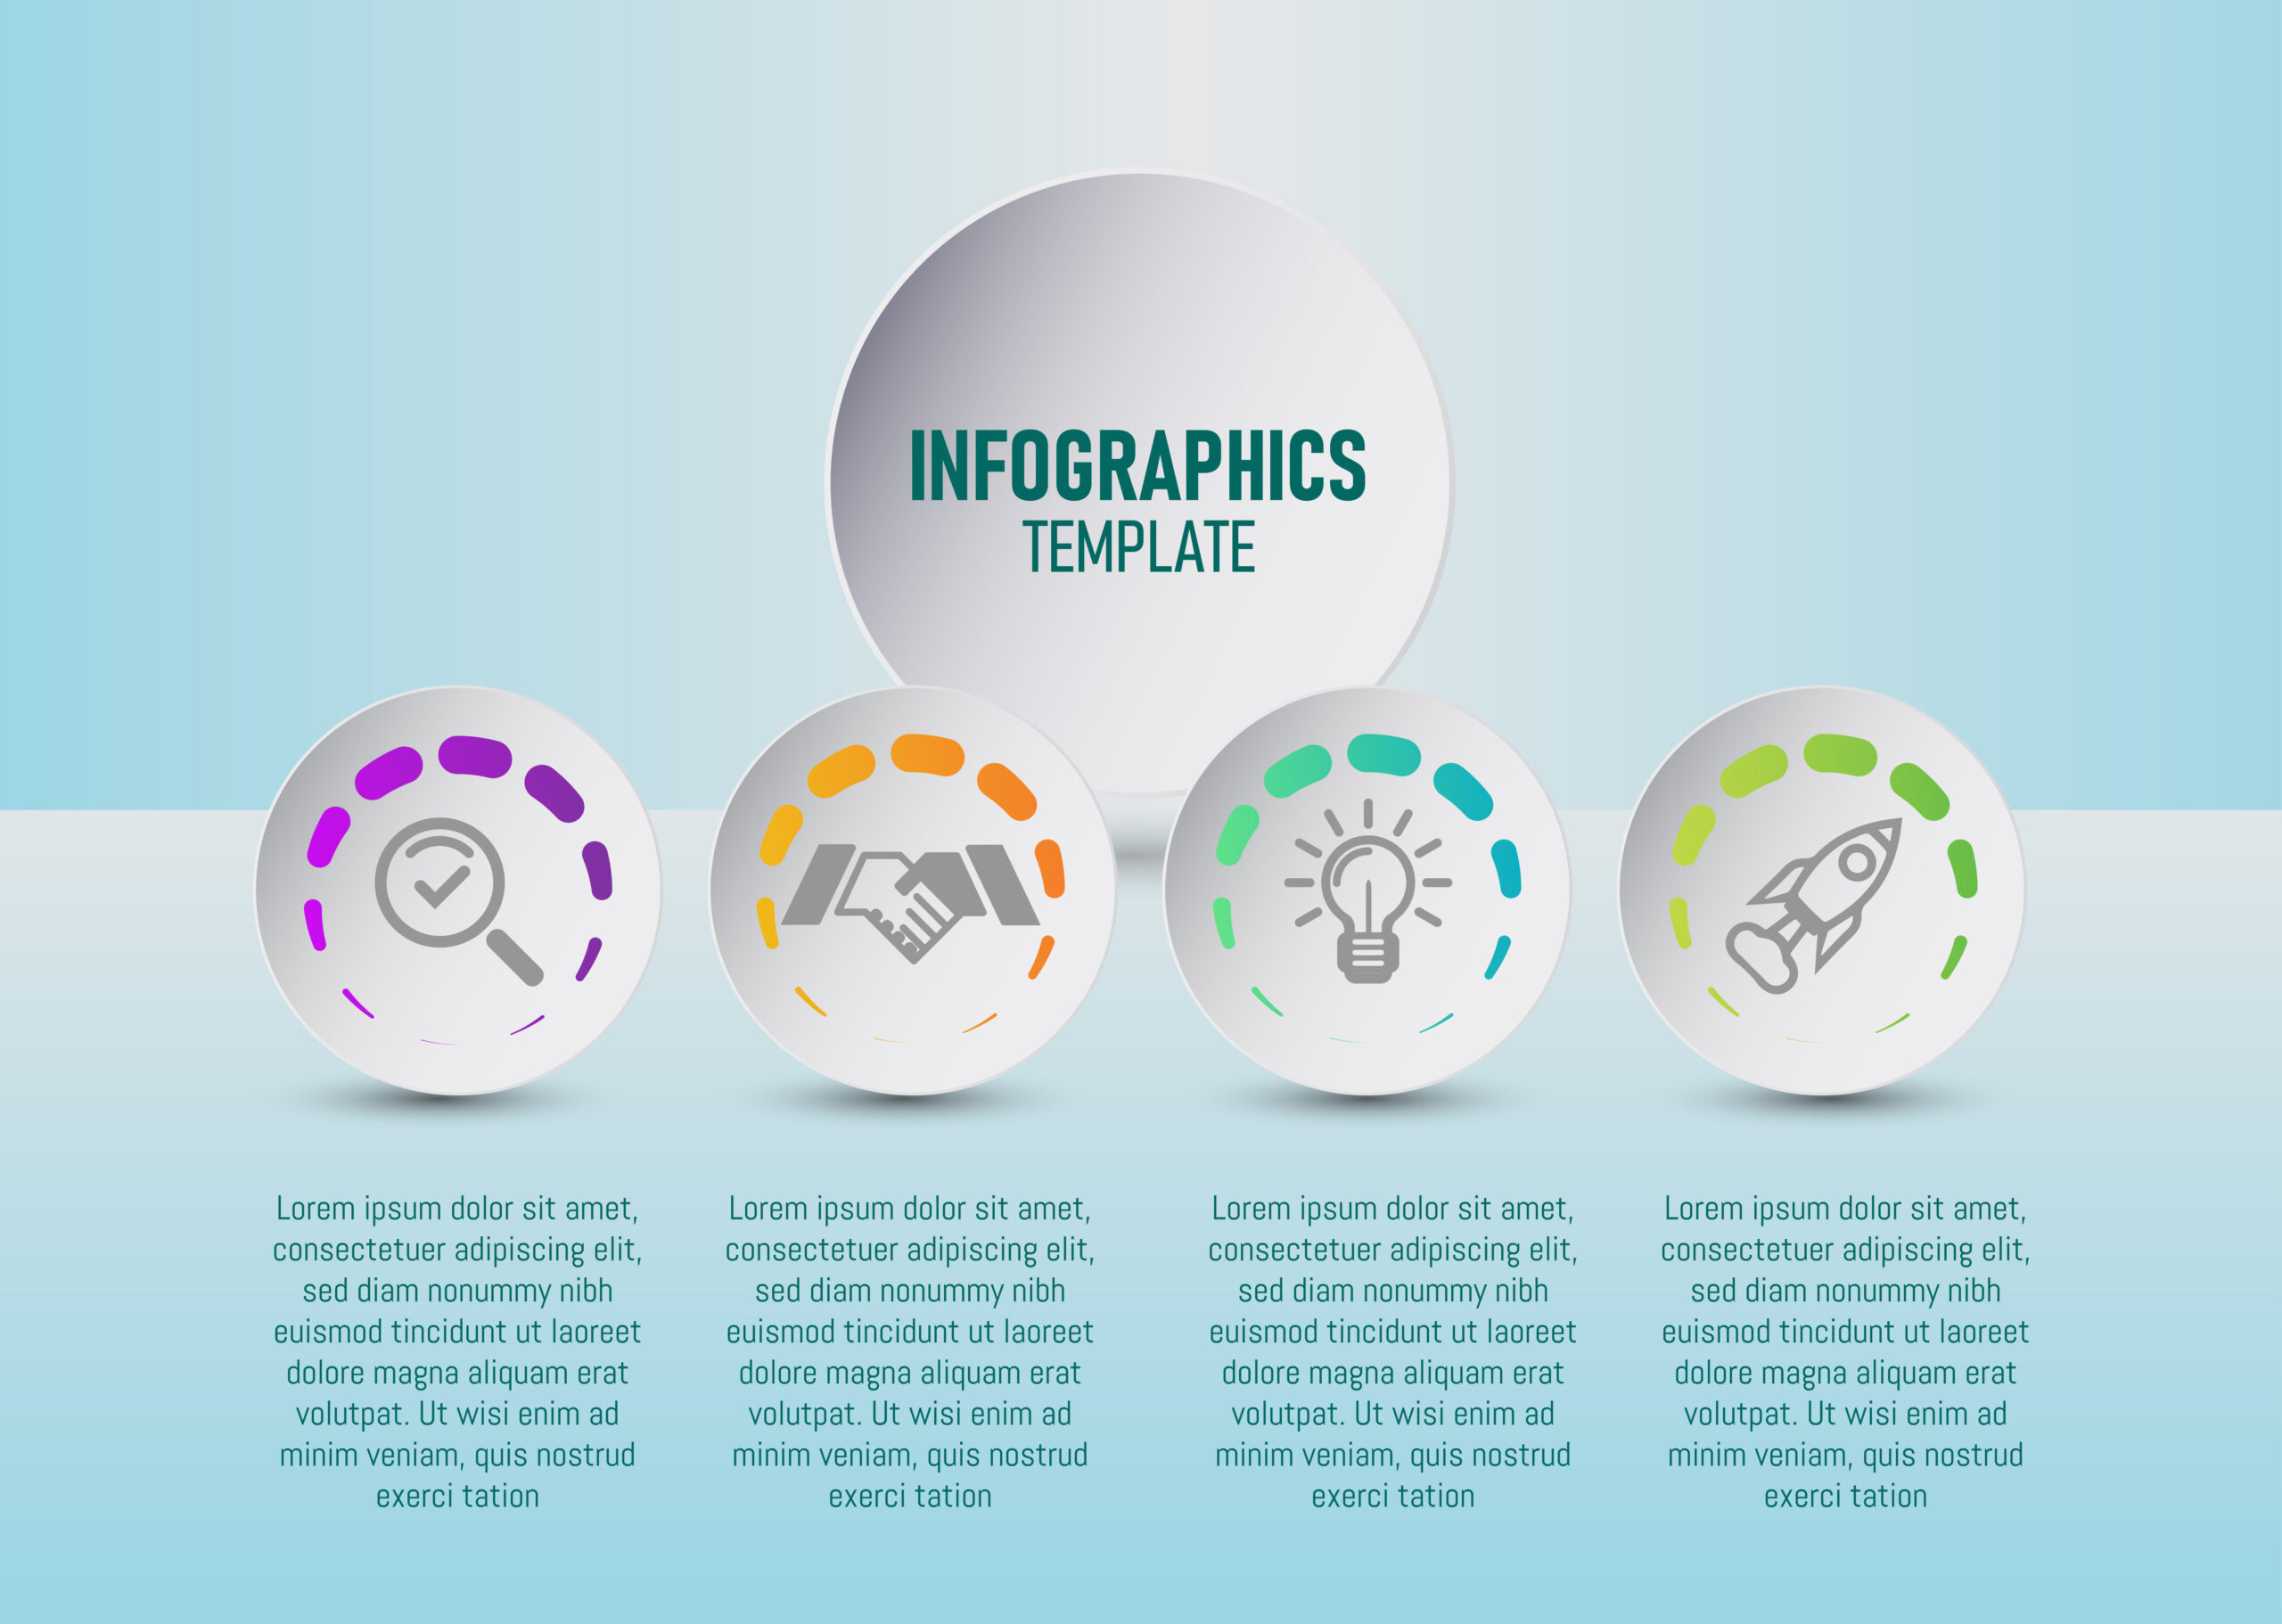 Strategic Planning Simplified Via 2 Awesome Infographics | CornerStone Dynamics